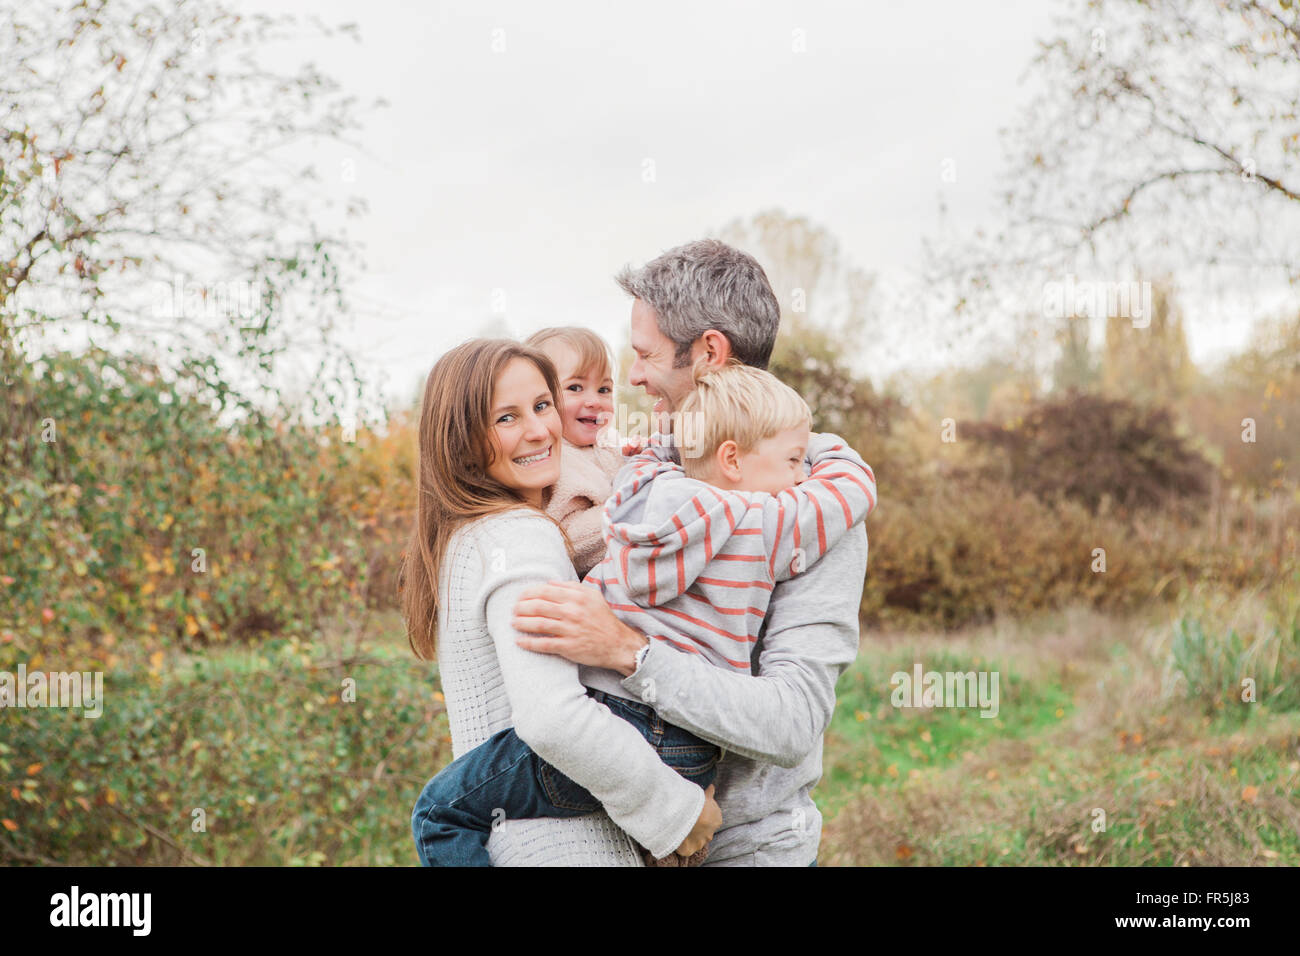 Smiling family hugging in autumn park Stock Photo